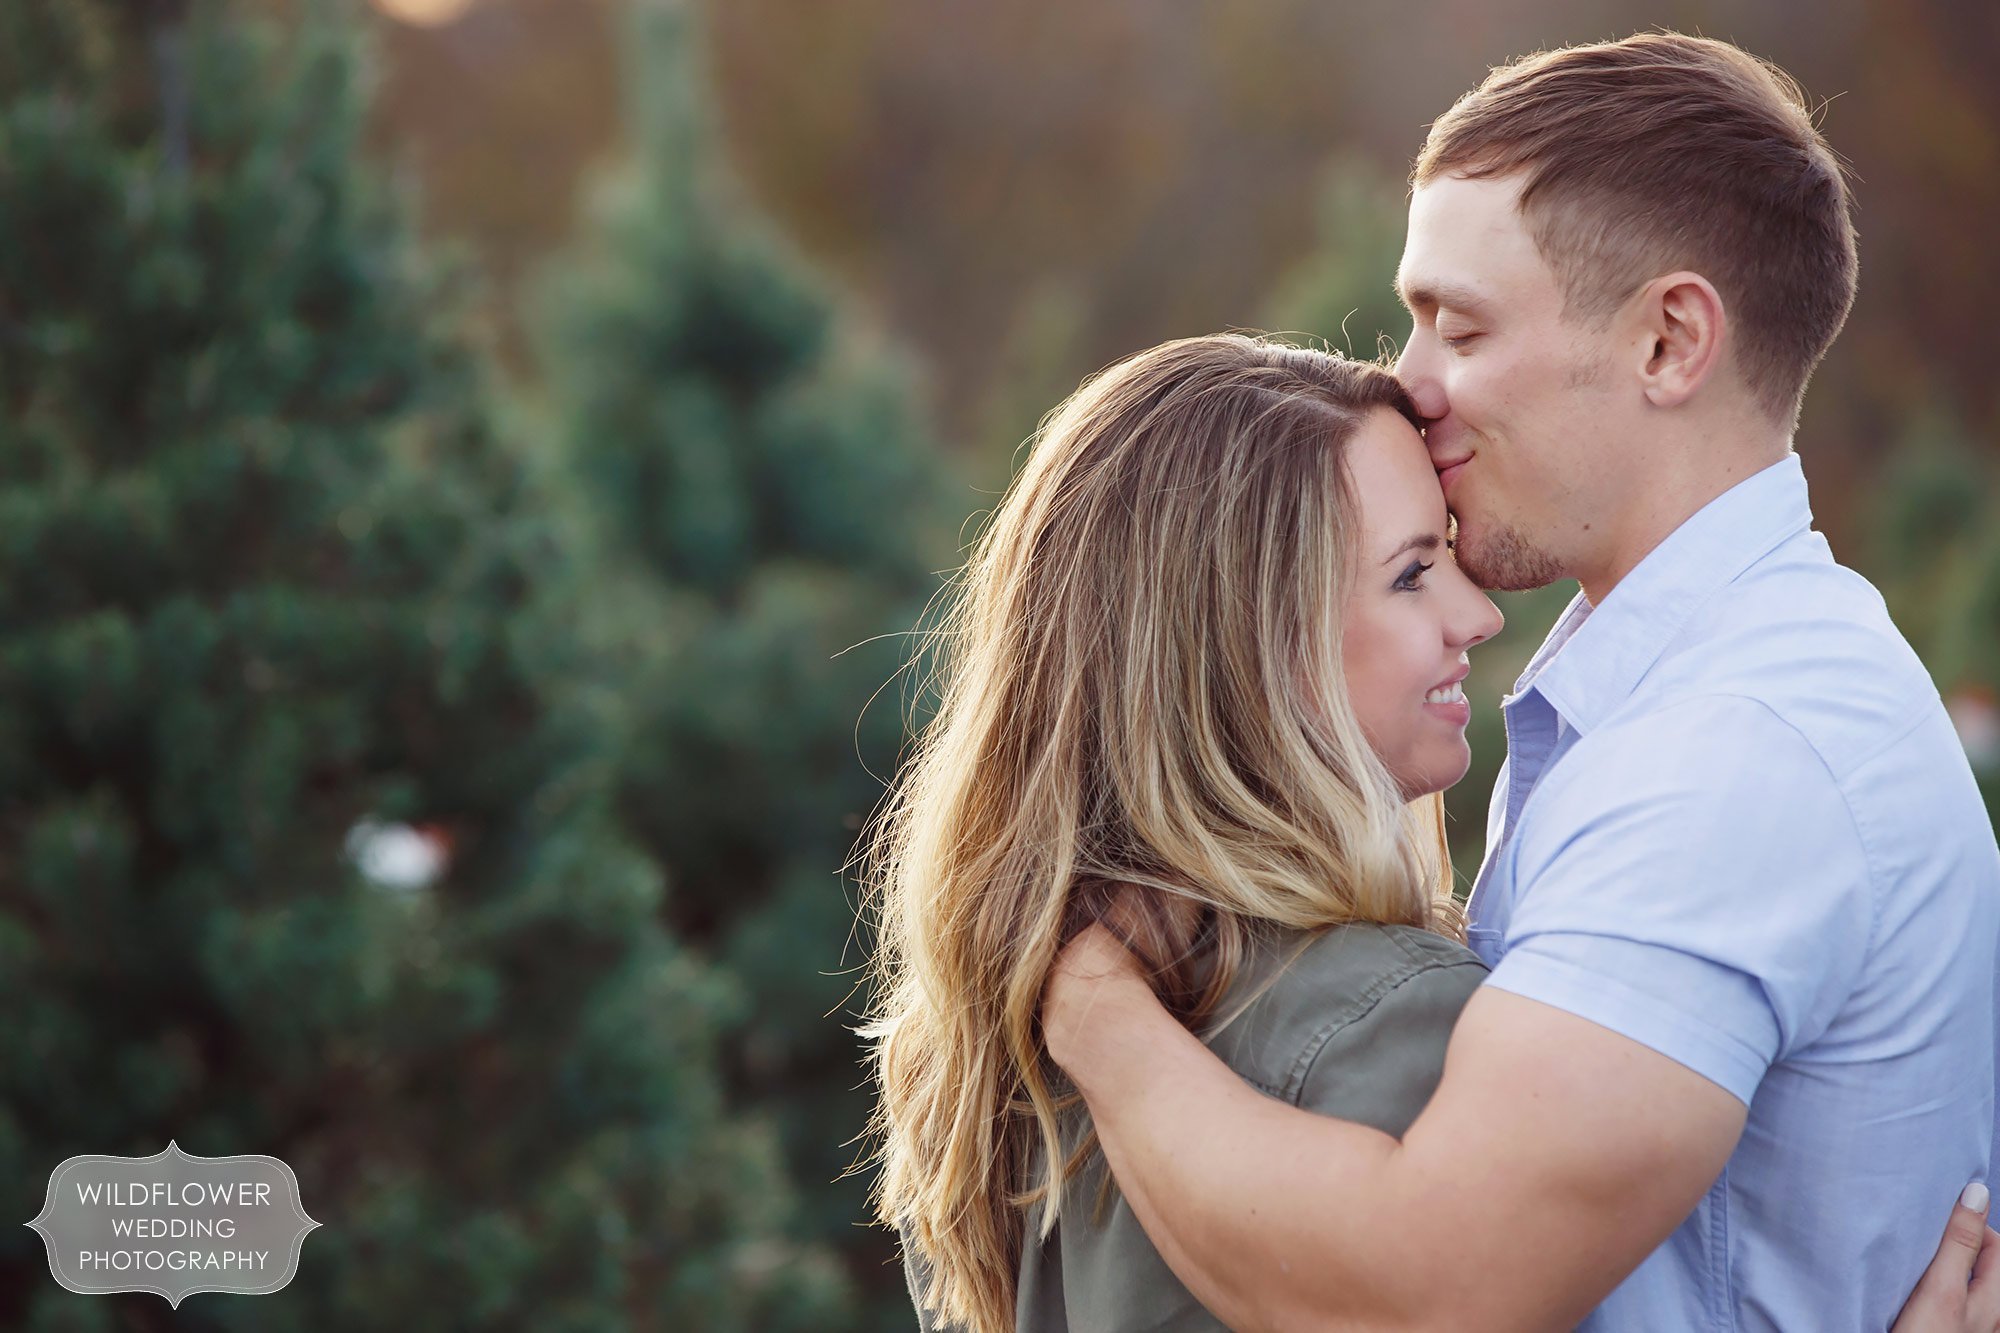 Sexy photo of the guys kissing the girl's forehead during this winter engagement session in Columbia, MO.